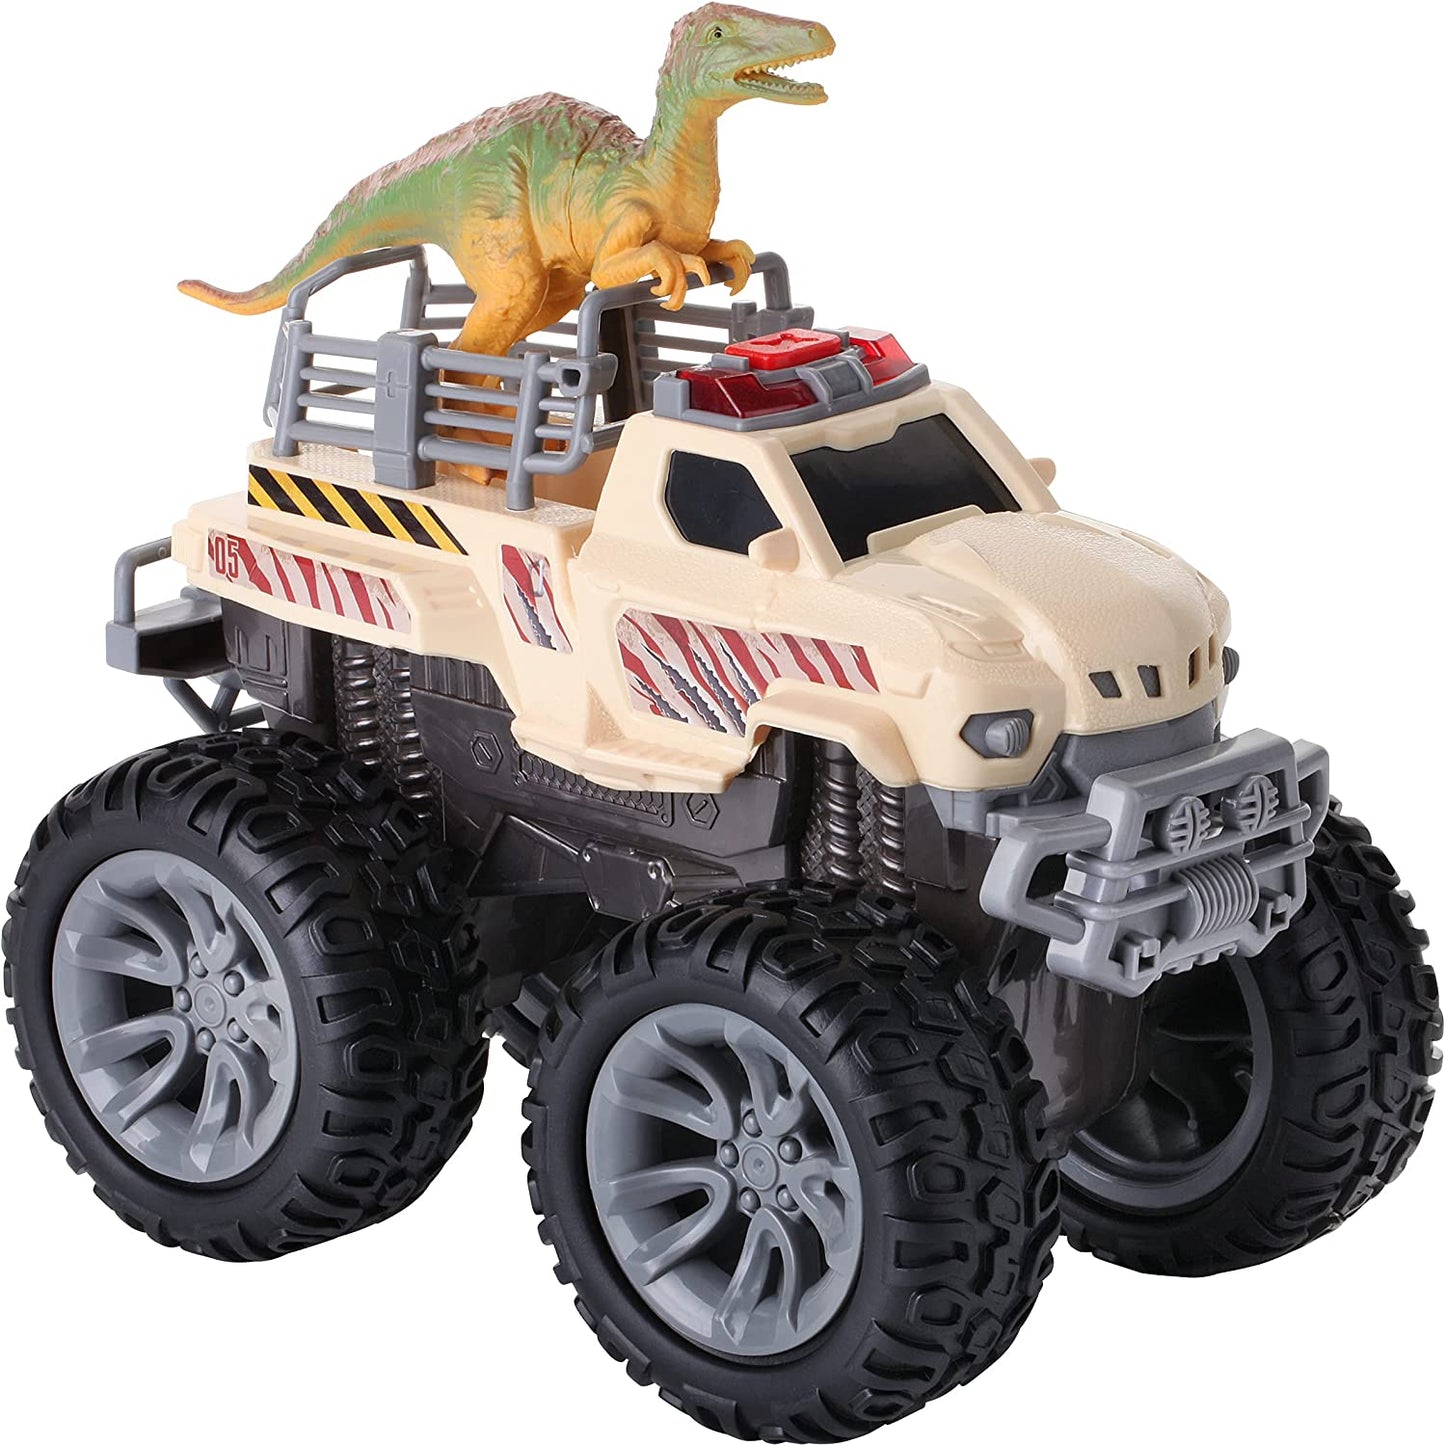 Dinosaur Transport Monster with Lights and Sounds, Dino Truck Transporter Vehicle Toy, Dinosaur Toys for Boys and Girls Ages 3+